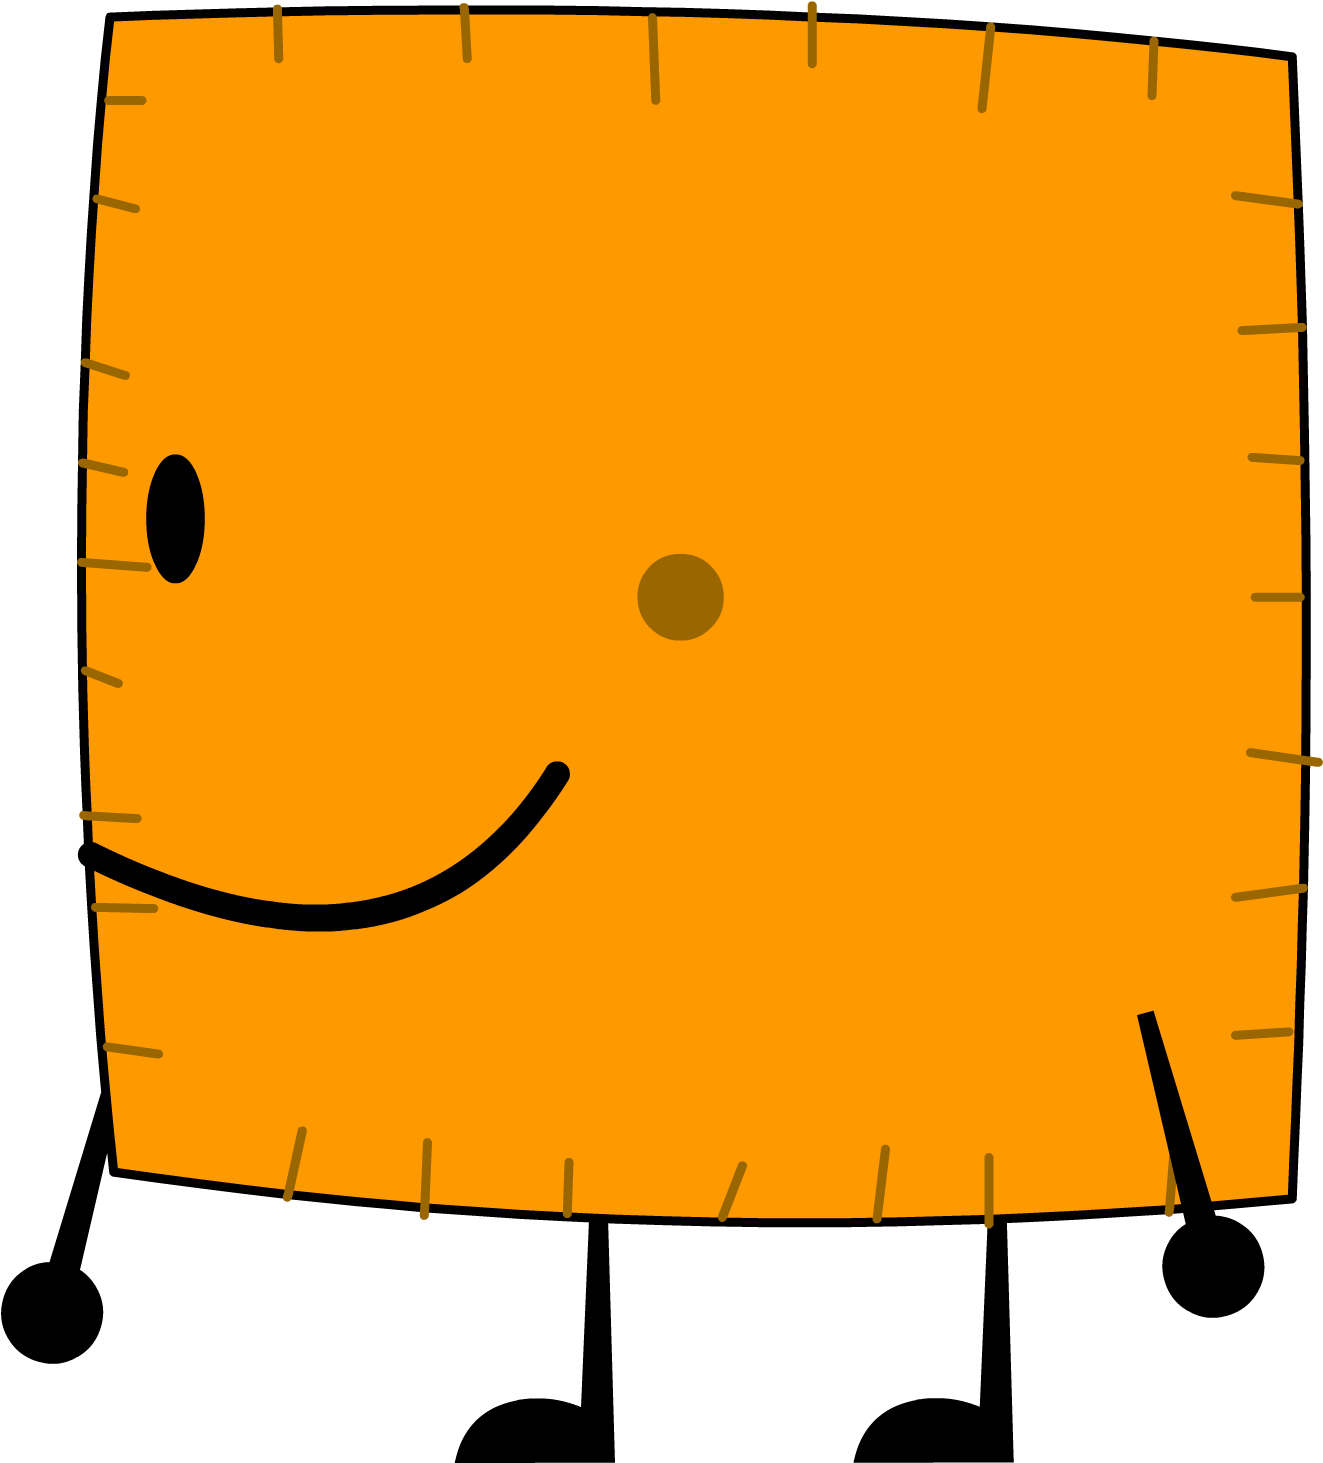 Download Recommended Charactersbfdia 3 Bfdi Recommended Characters Assets Png Image With No 1561